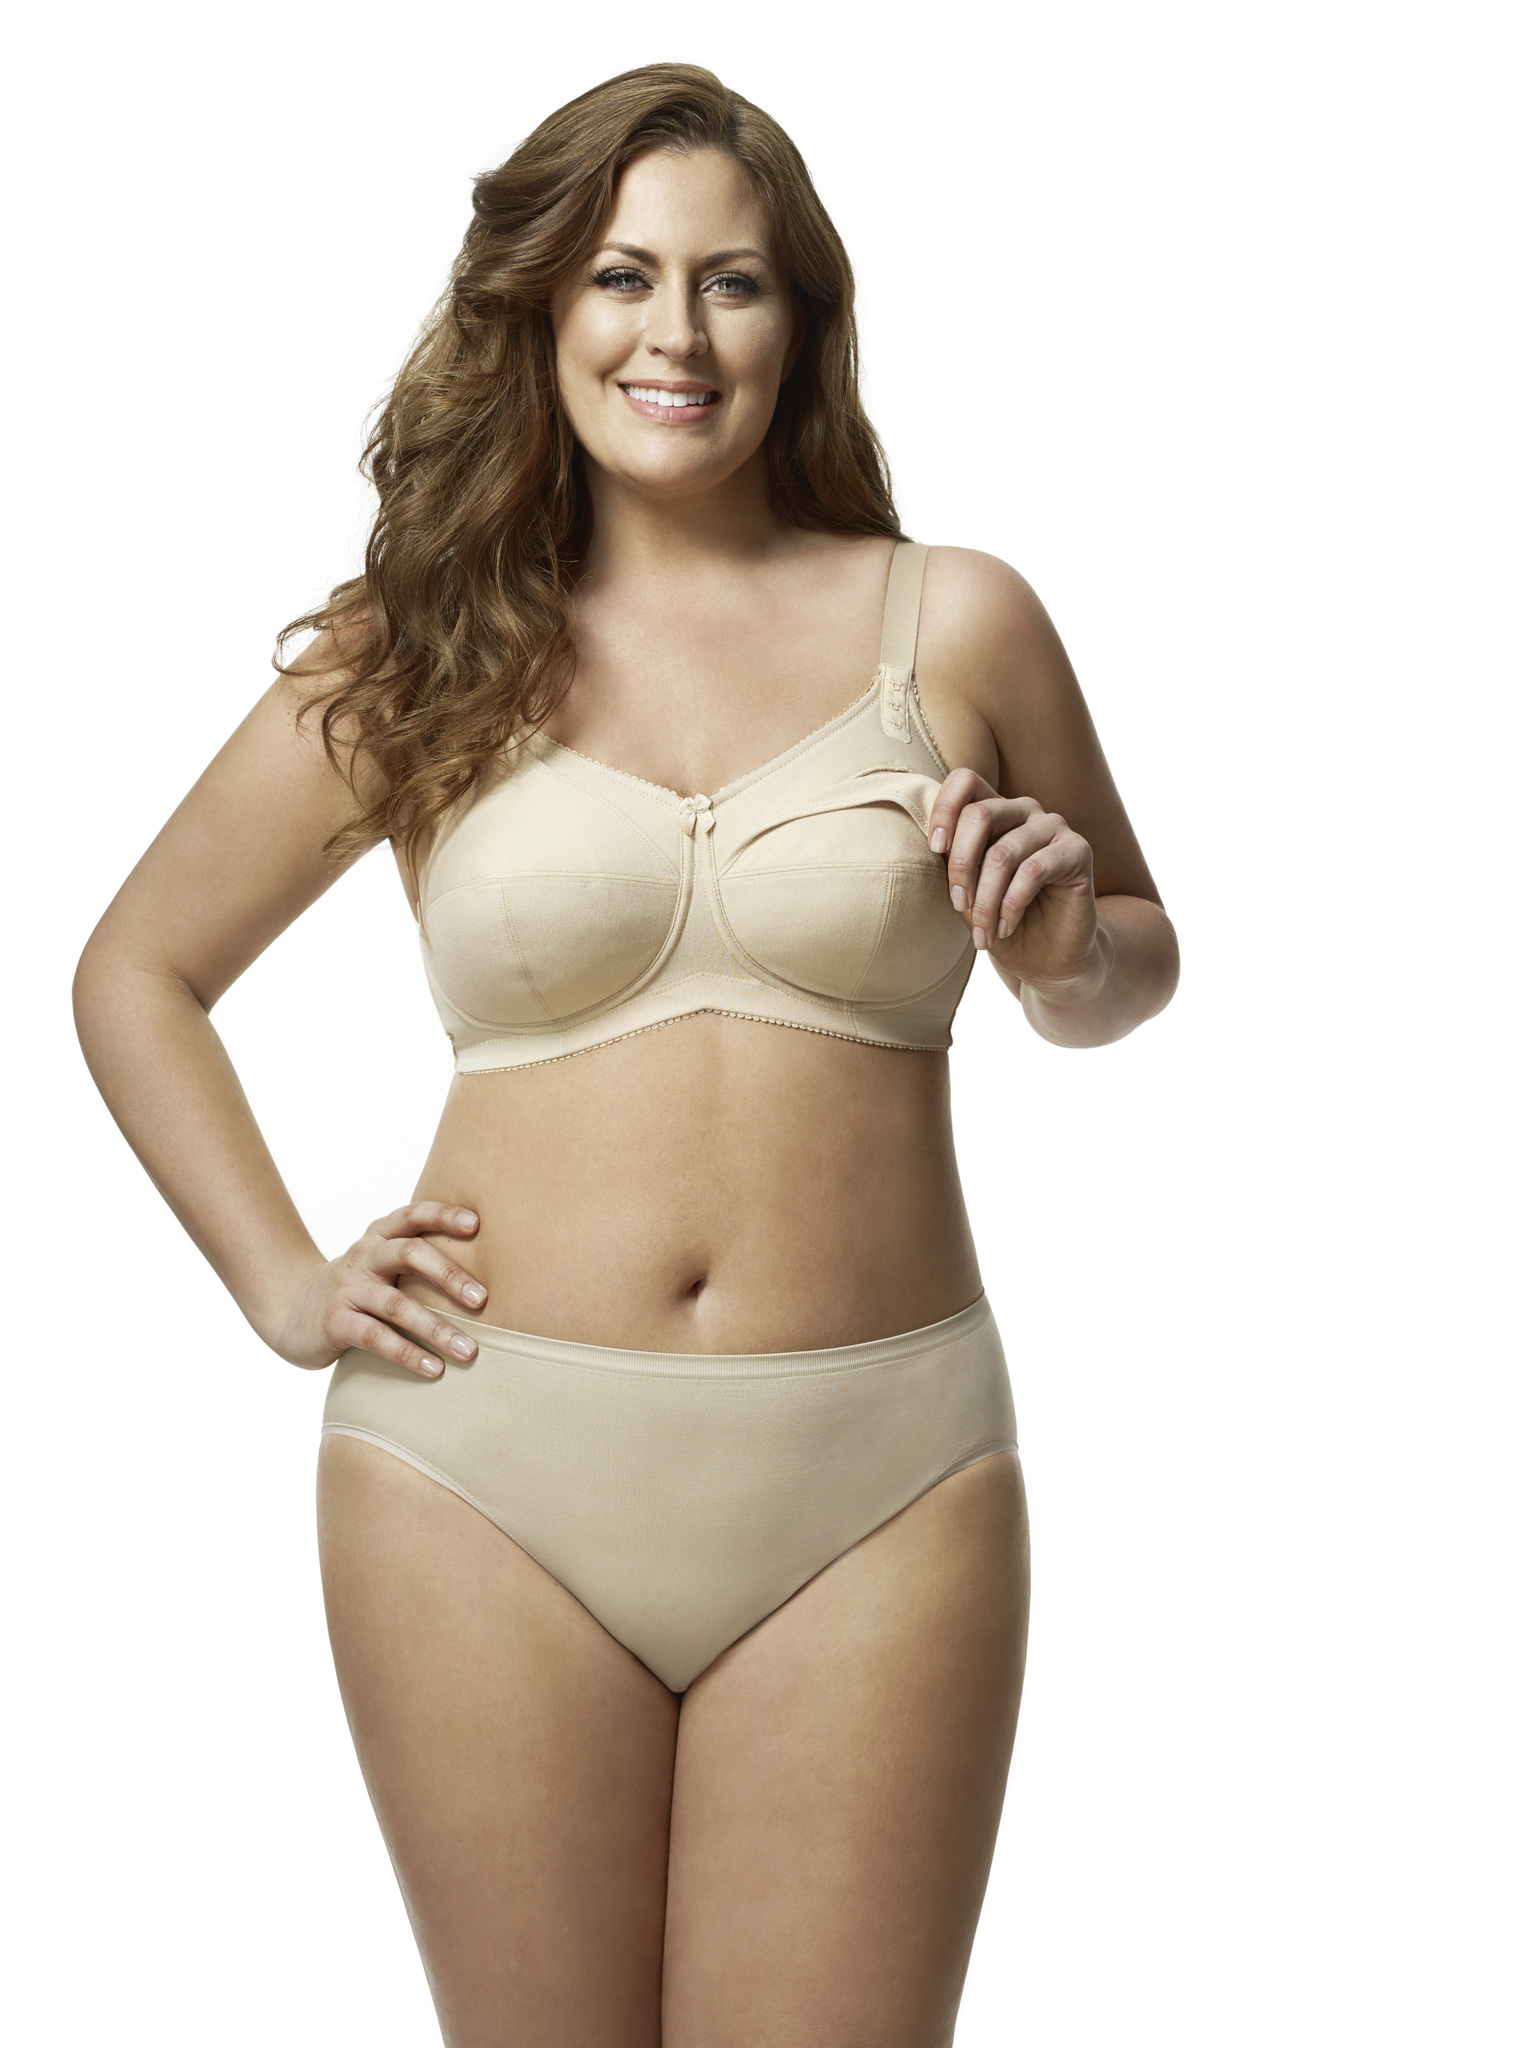 Cotton maternity bra with breast support and adjustable straps